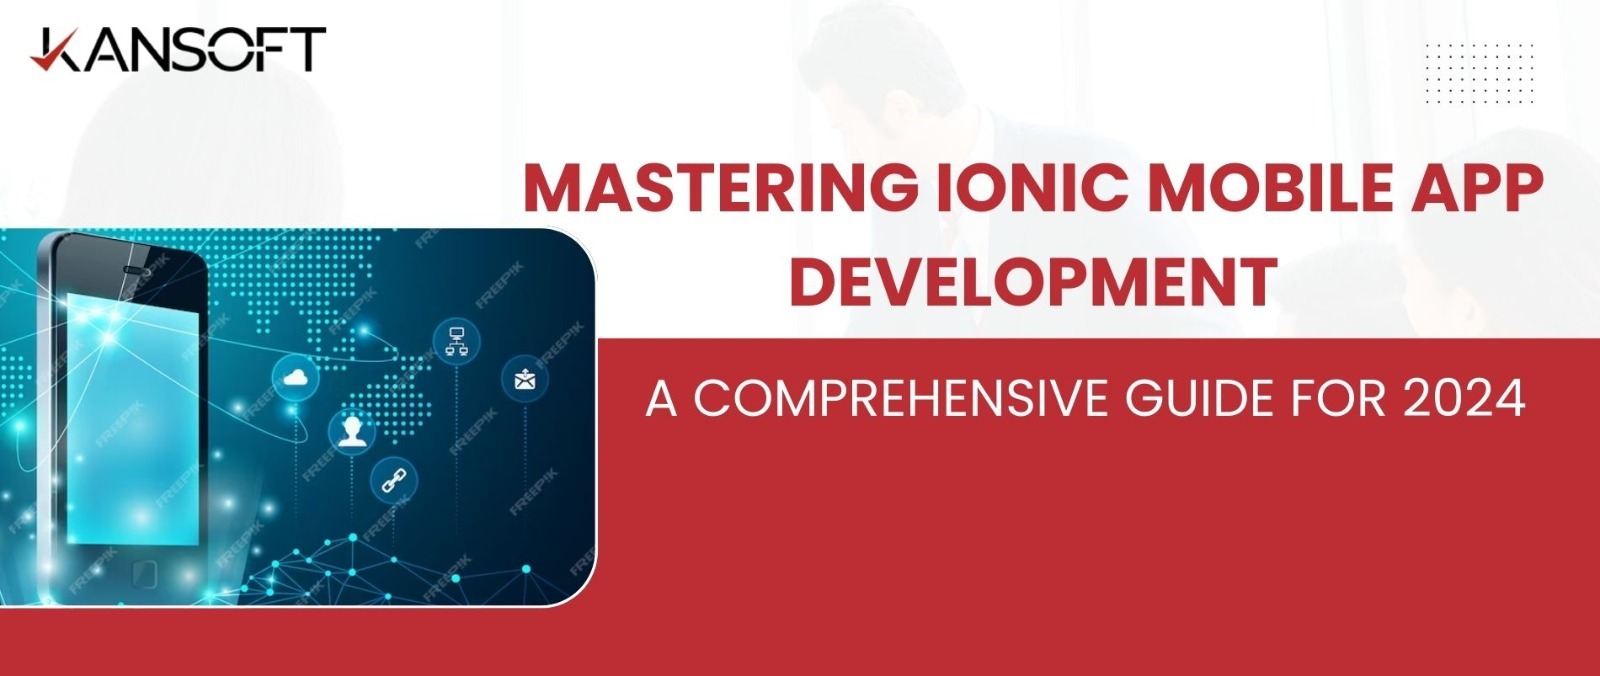 Mastering Ionic Mobile App Development: A Comprehensive Guide for 2024